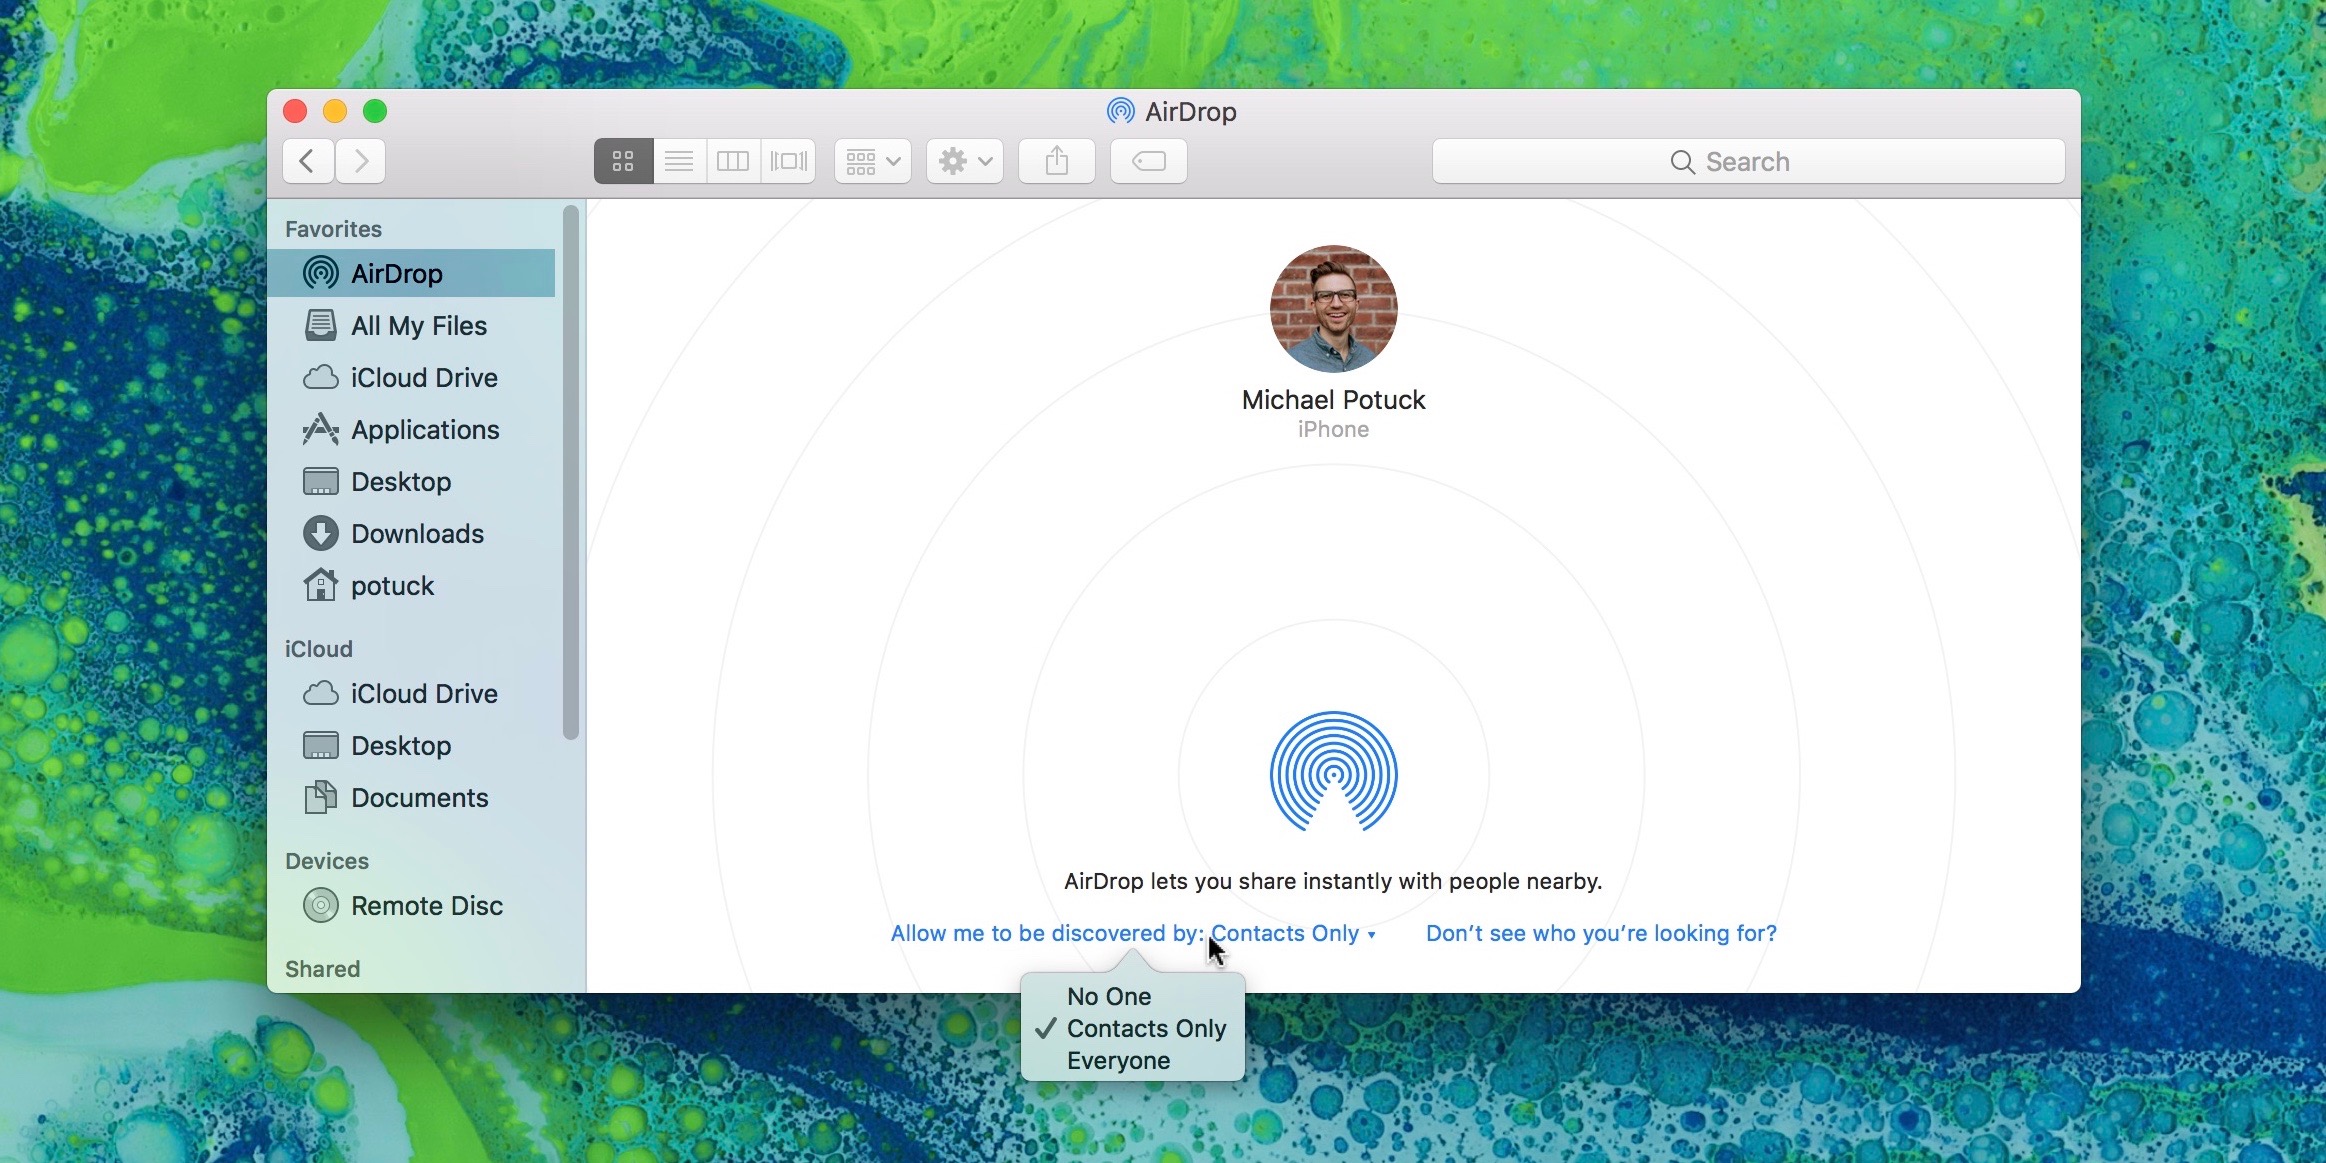 How to use AirDrop - 9to5Mac